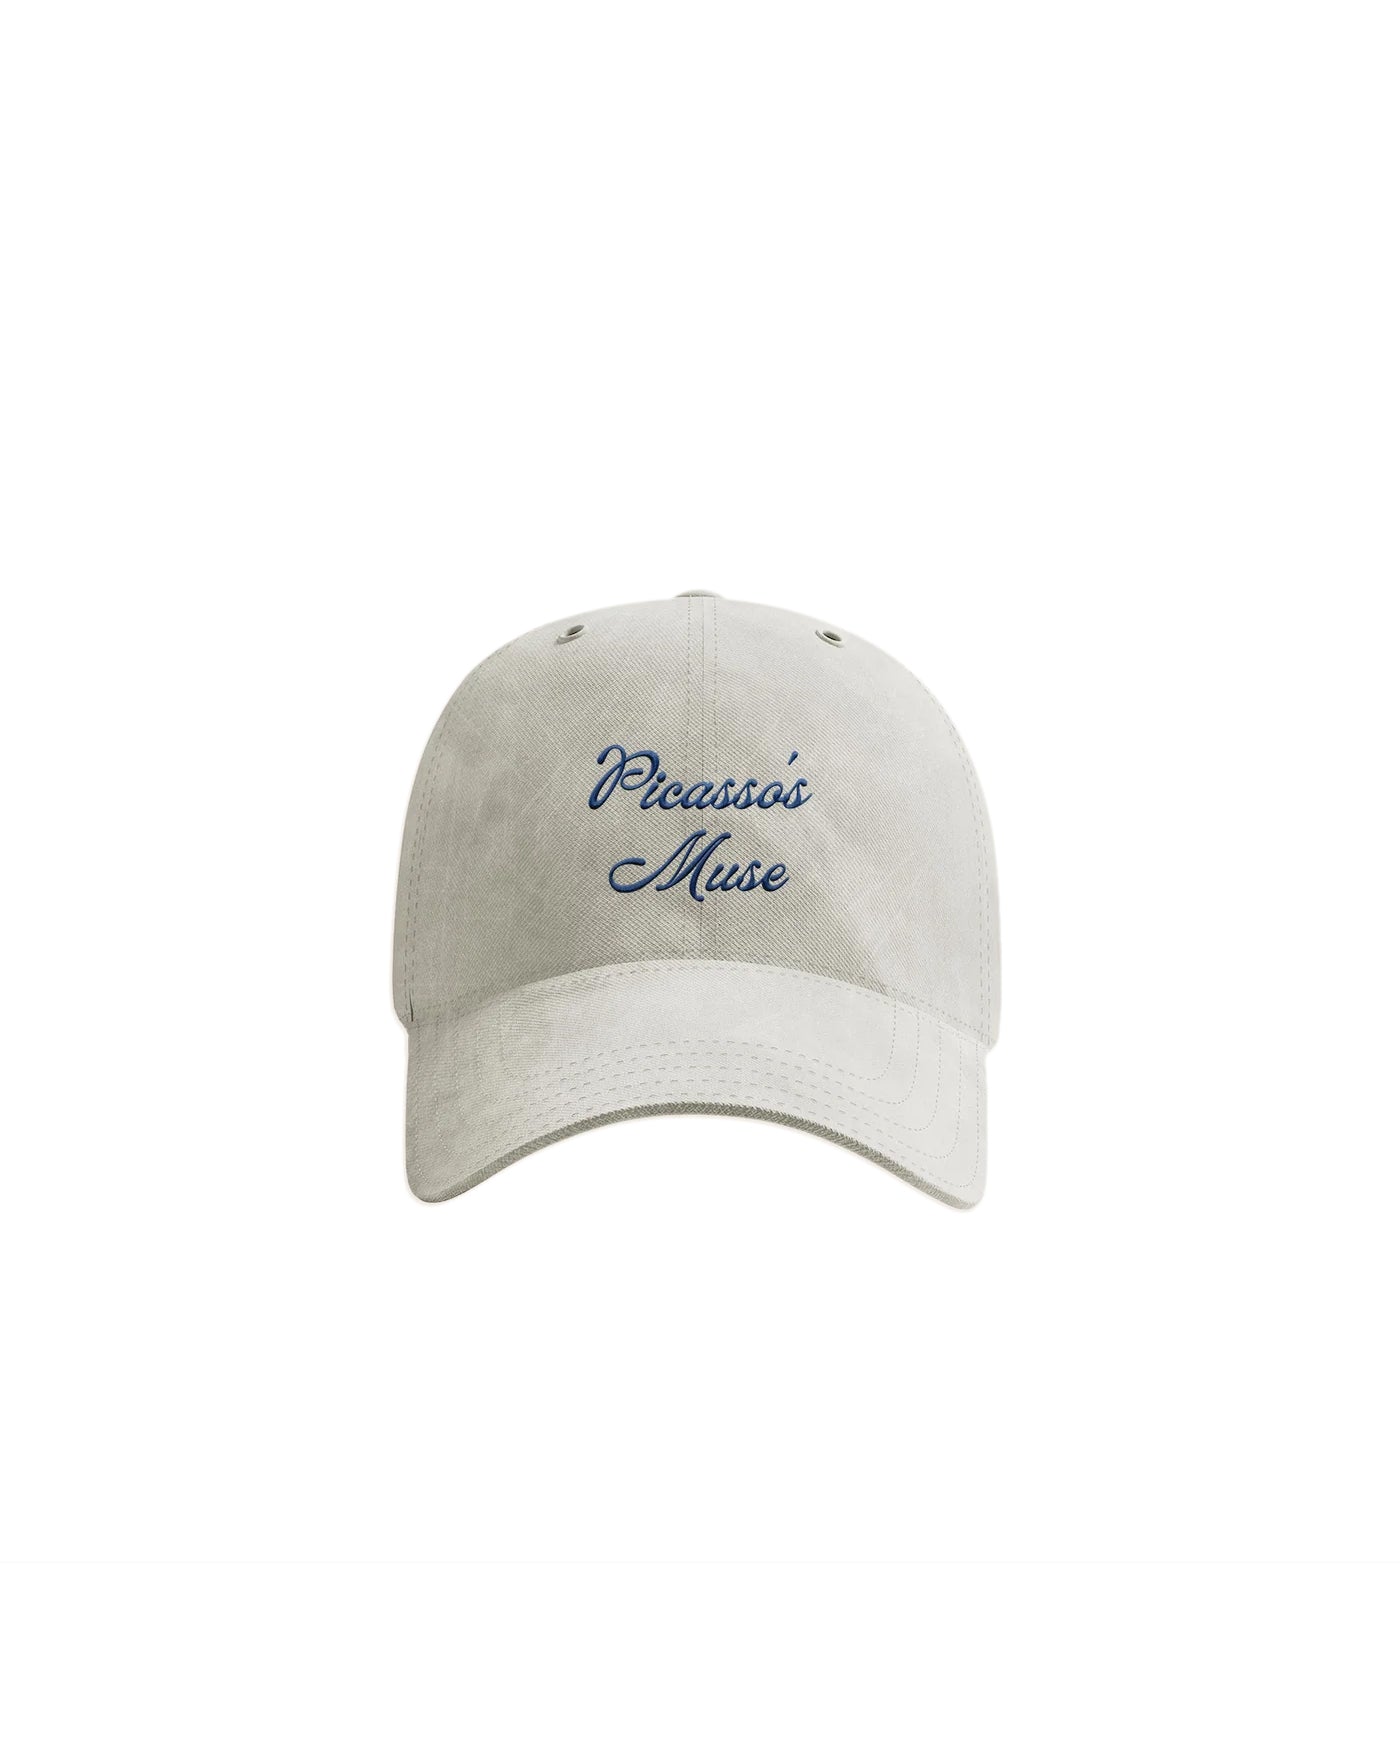 Picasso's Muse Dad Hat